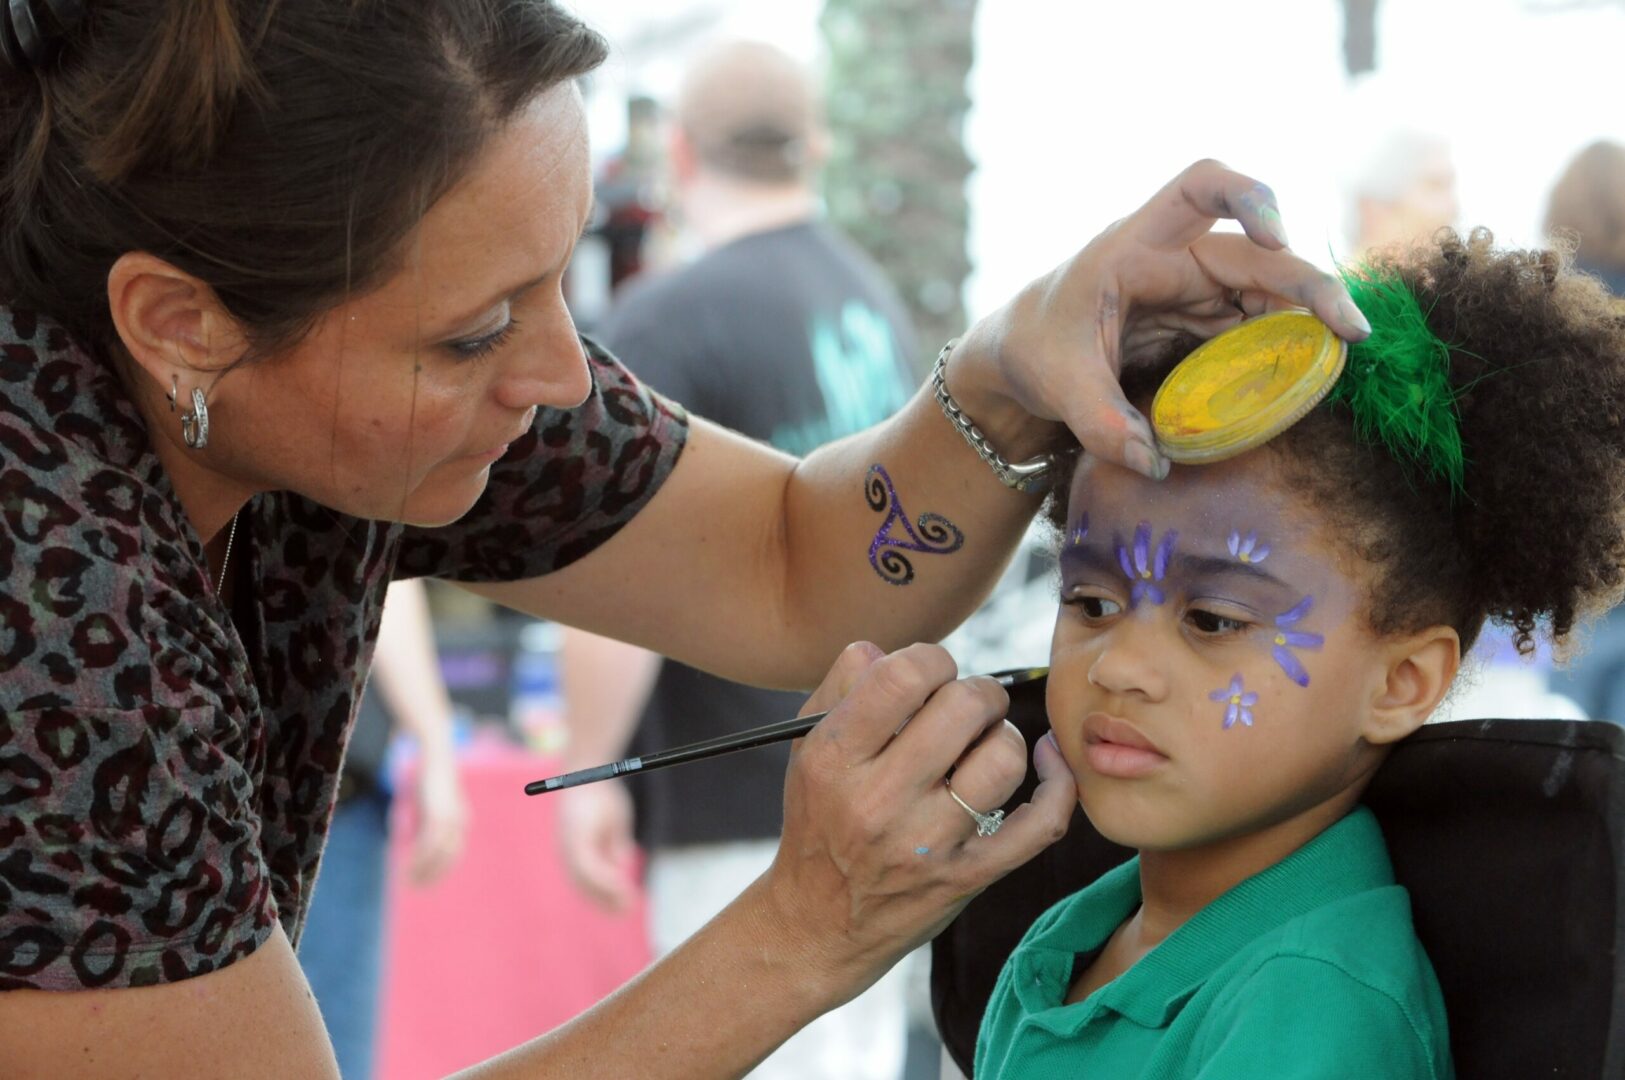 A woman is painting the face of a child.